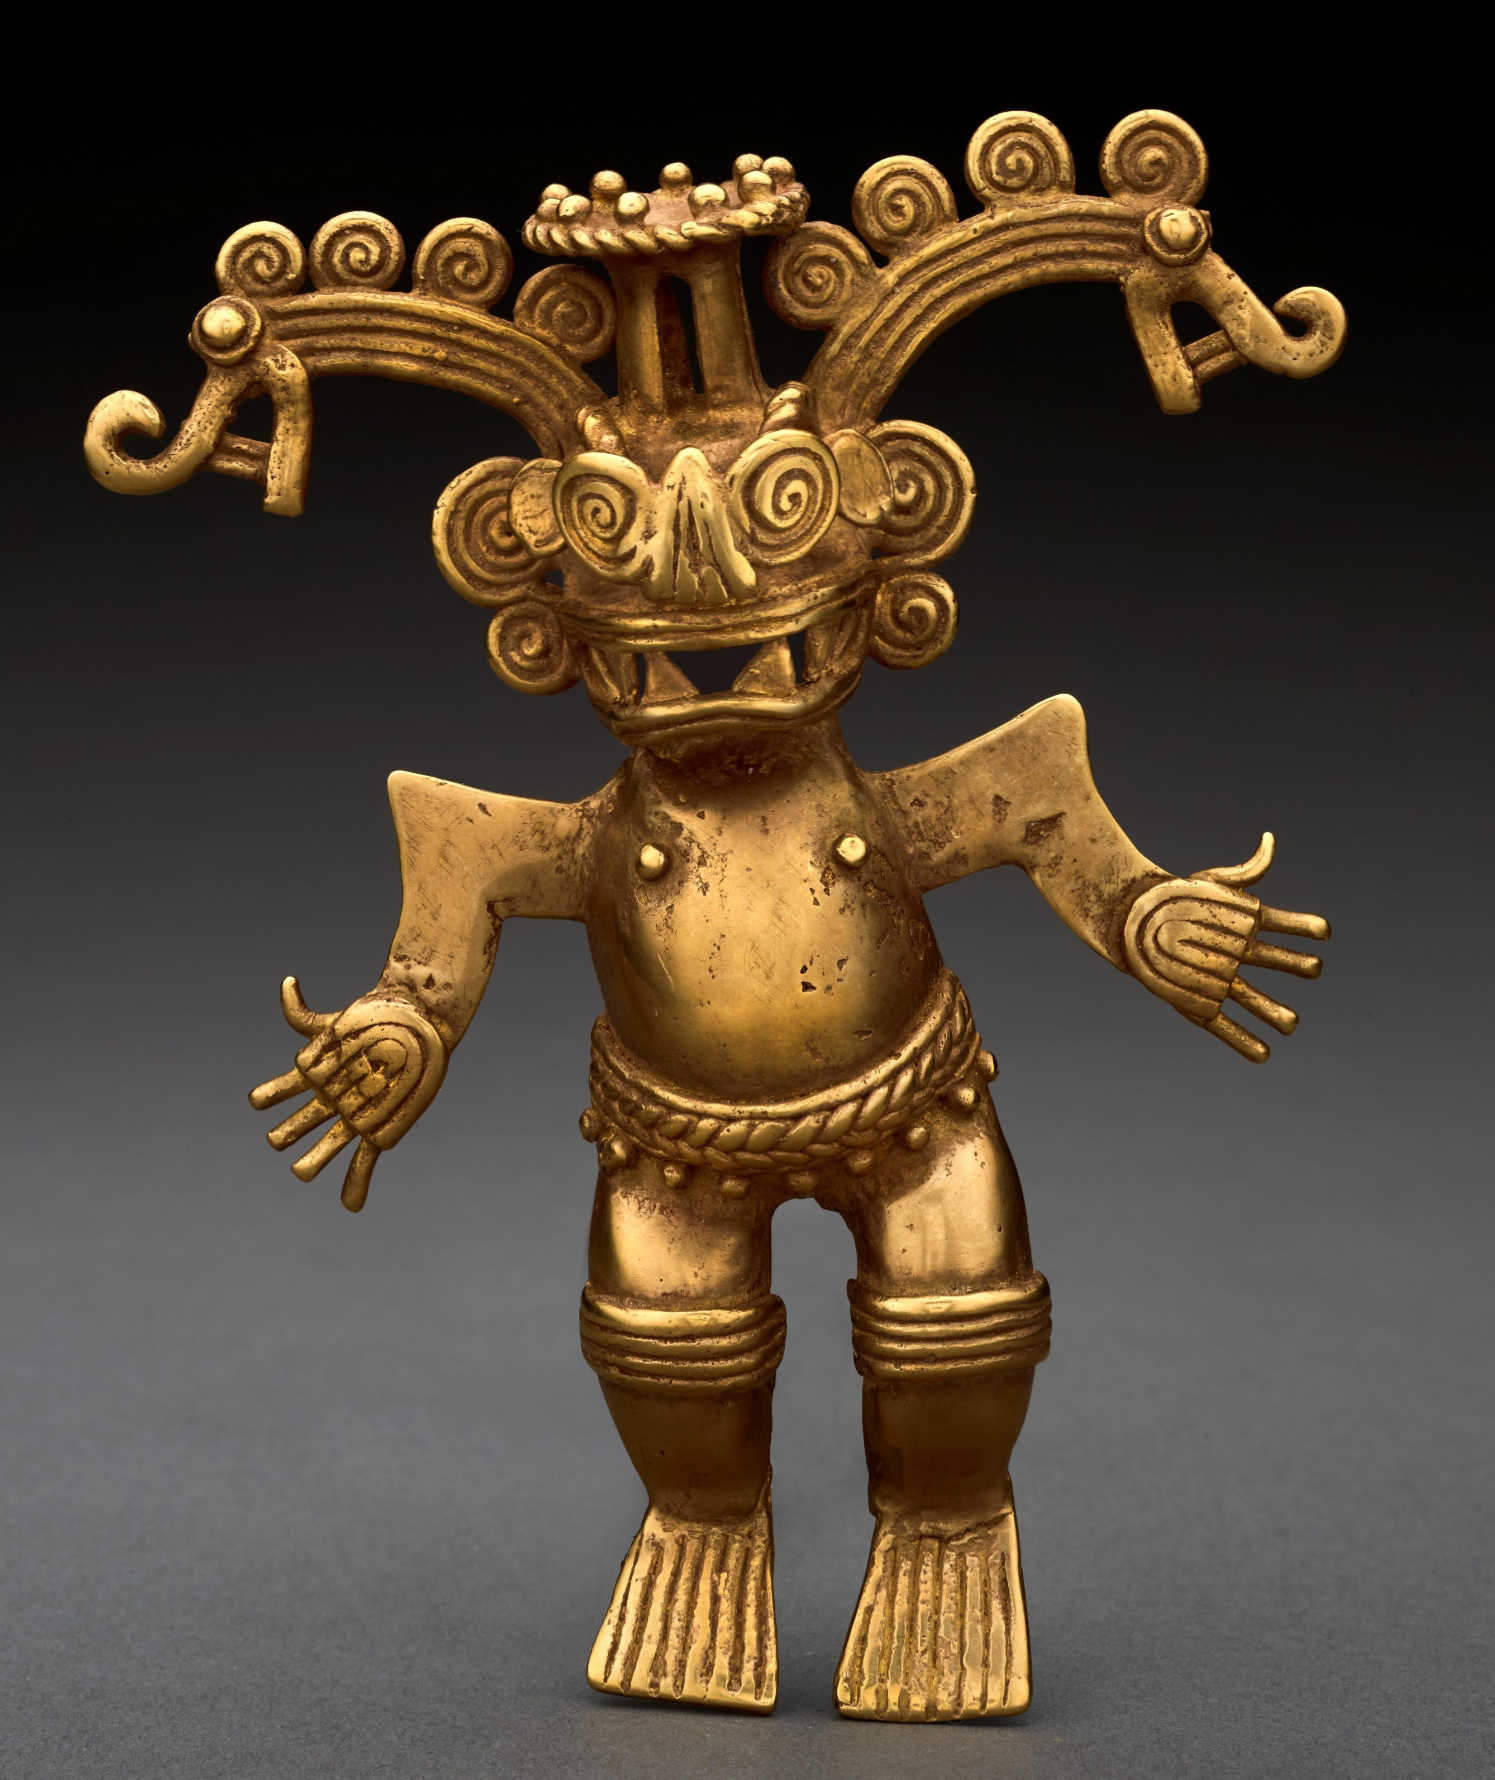 Gold pendant in the shape of a bat-headed figure. Greater Chiriquí, Panama, 700-1550 AD.jpg